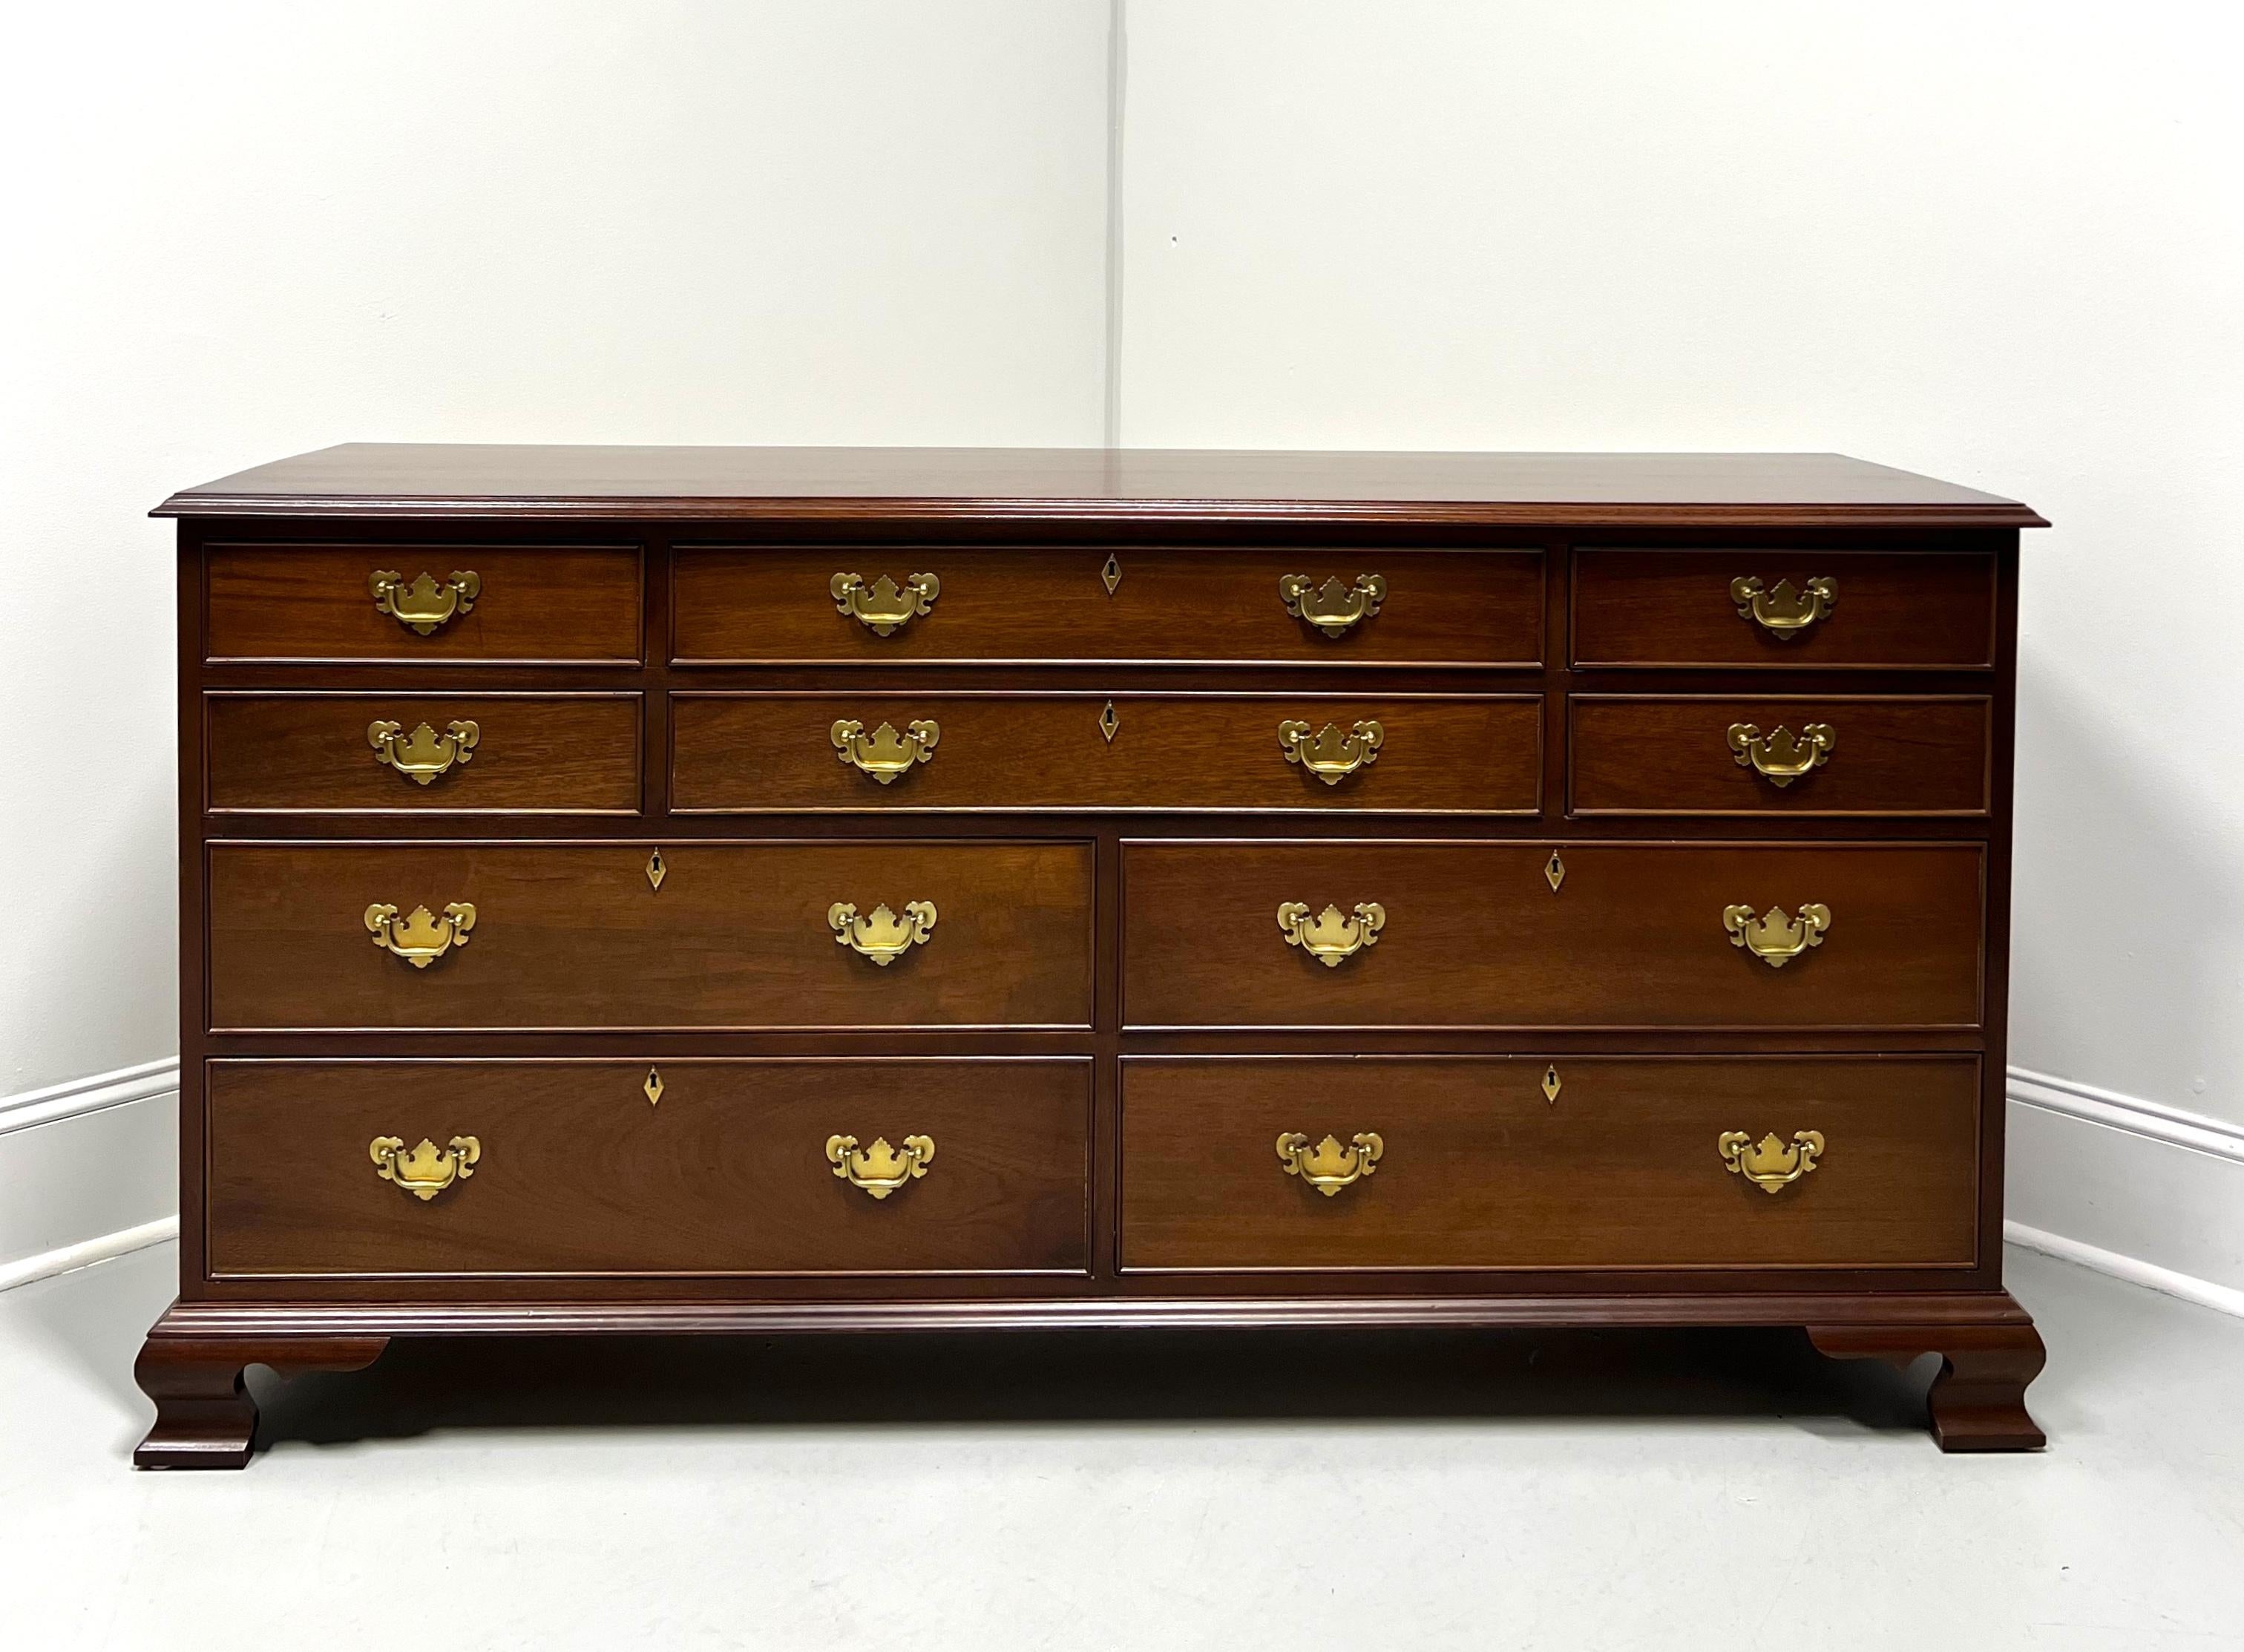 A Chippendale style triple dresser by high-quality furniture maker Craftique. Solid mahogany with their Old Wood finish, brass hardware, ogee edge to the top, brass keyhole escutcheons, and ogee bracket feet. Features ten various size drawers of